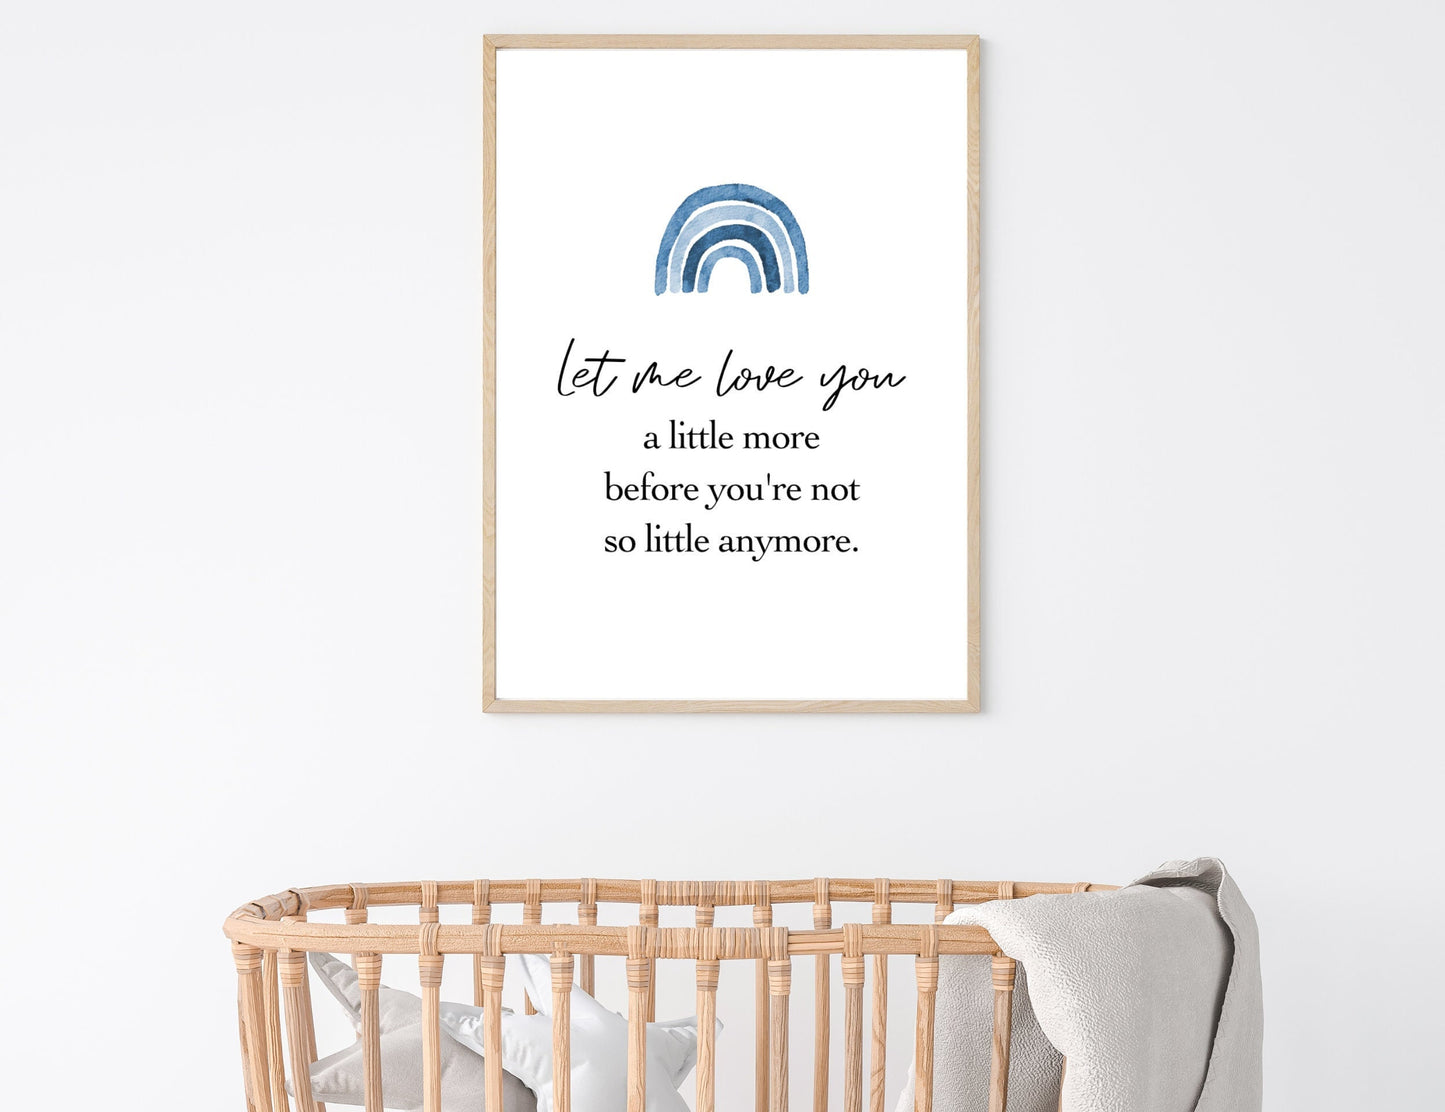 A digital print showing a blue rainbow design at the top and a piece of writing that says: “Let me love you, a little more before you’re not so little anymore.”